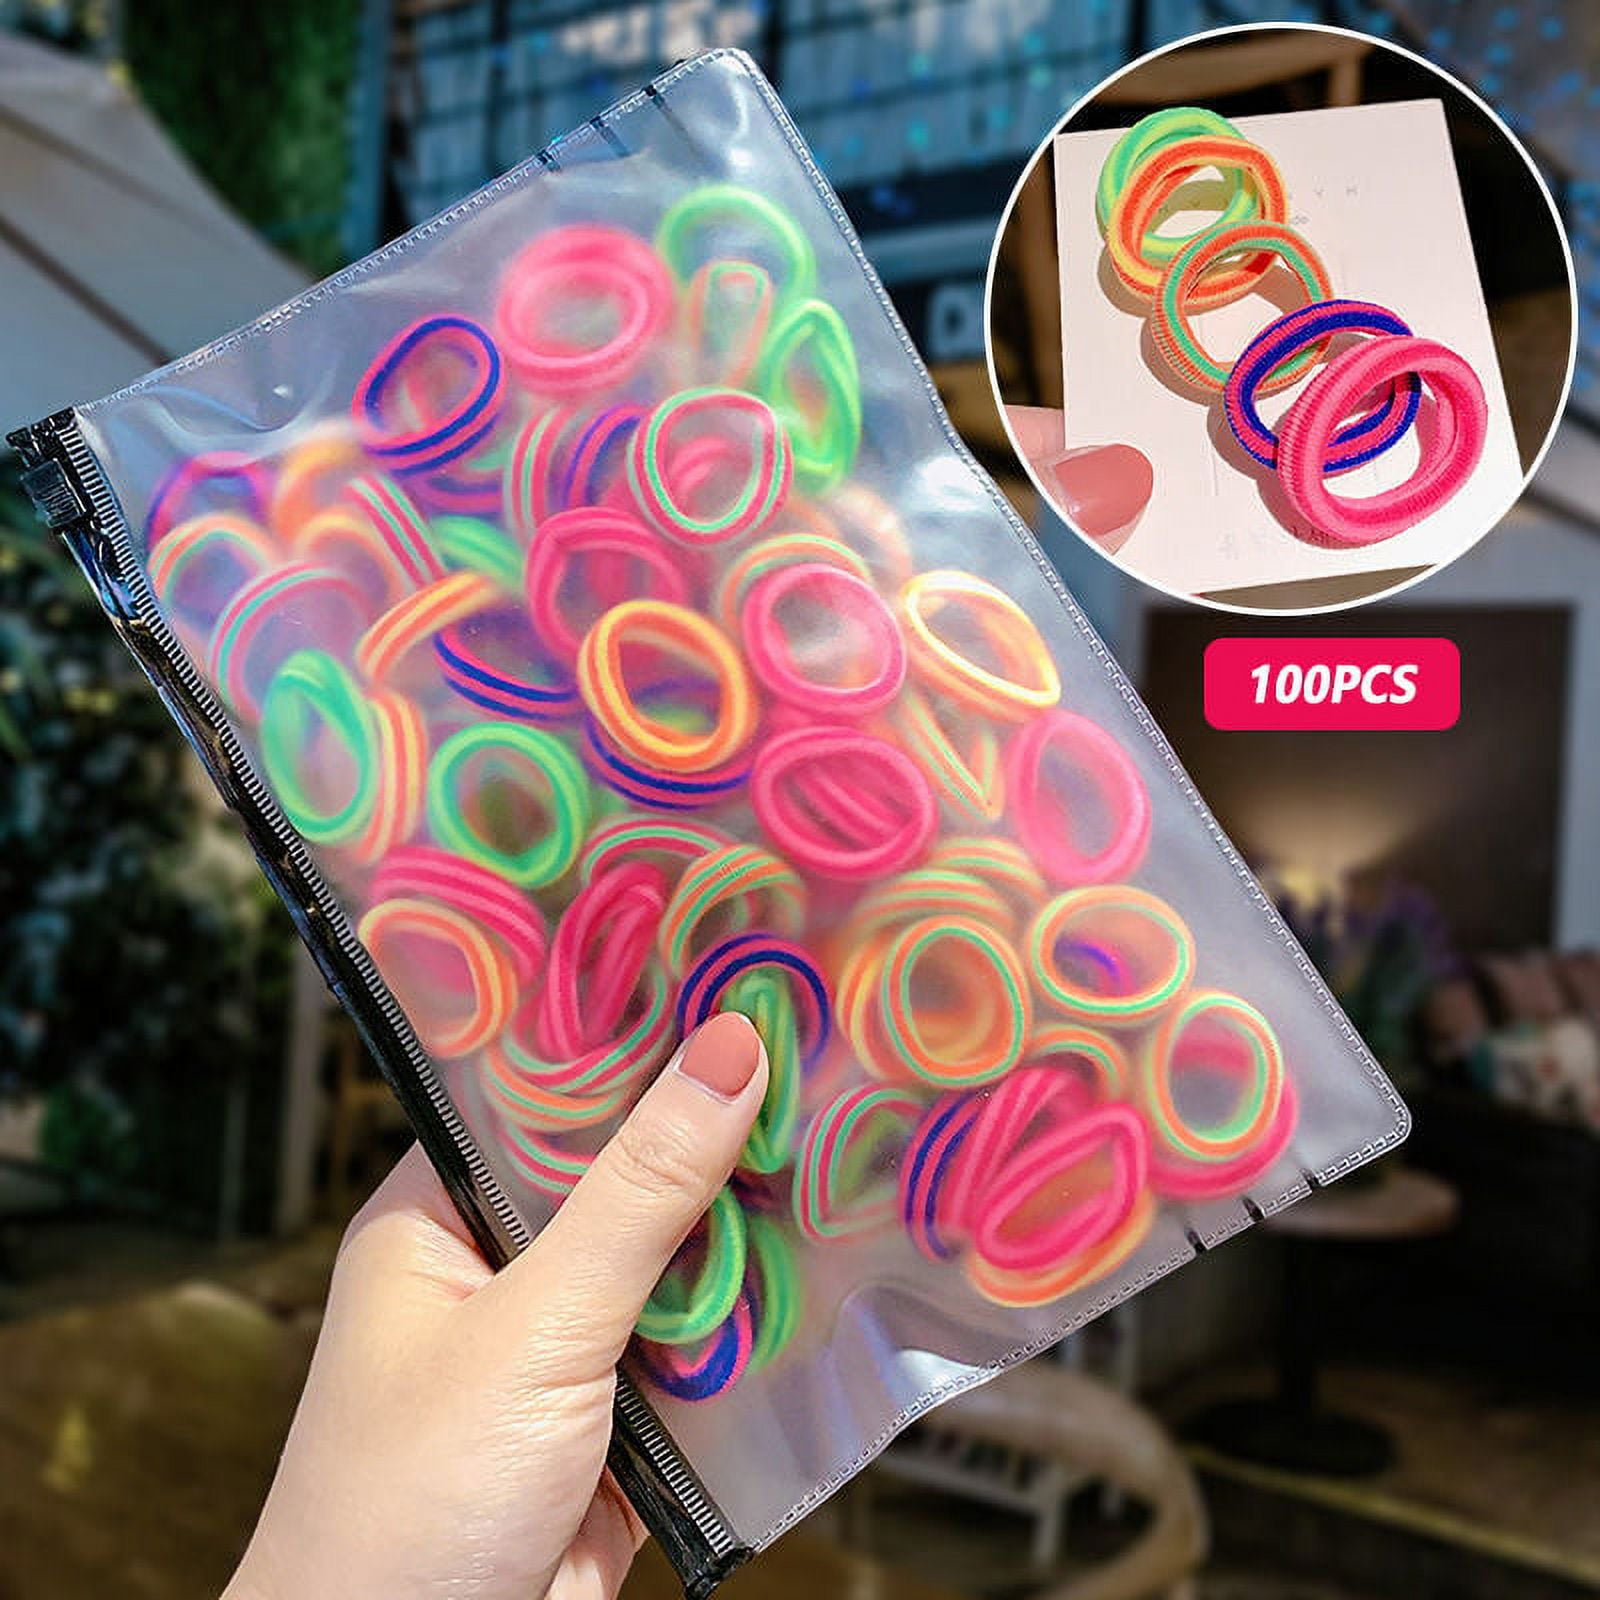  100PCS 2 Inches Fluorescent Hair Ties for Women Girls, Sublaga  Seamless Thick Fluorescent Hair Band, Elastic Hair Ties No Damage Ponytail  Holder (Fluorescent color) : Beauty & Personal Care